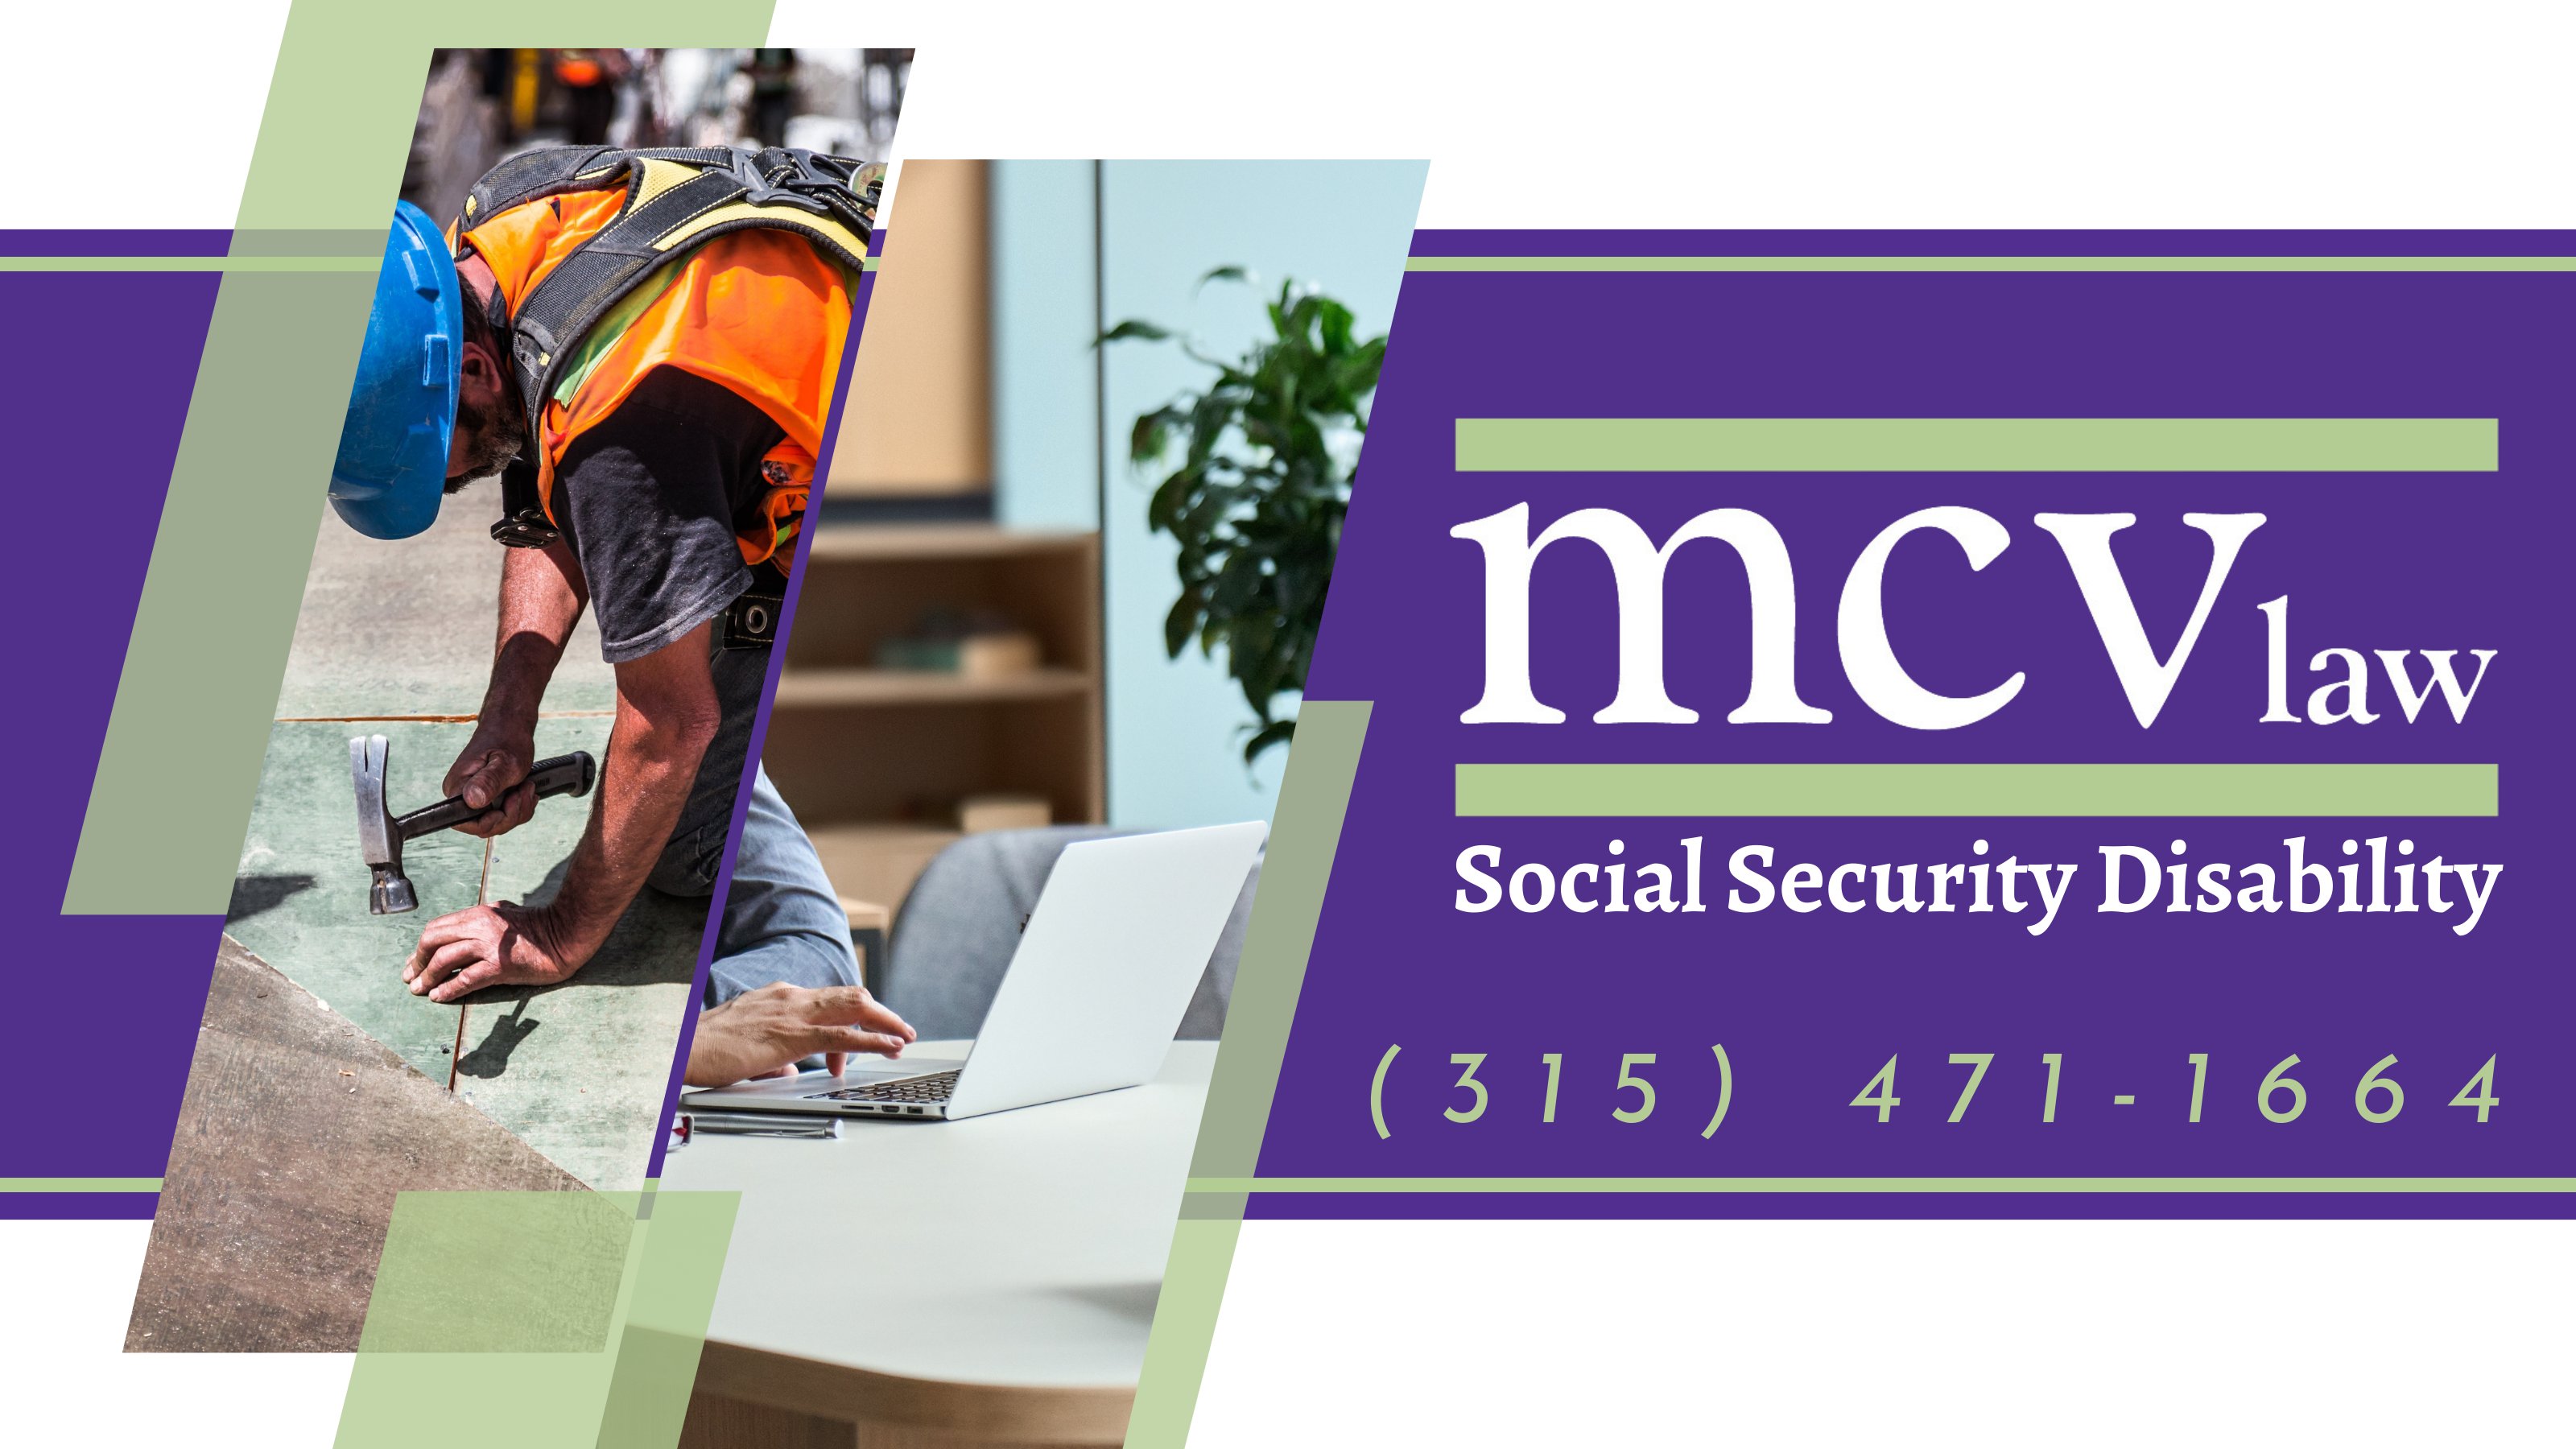 How does work history impact SSDI eligibility? Social Security Disability law firm in Syracuse, NY